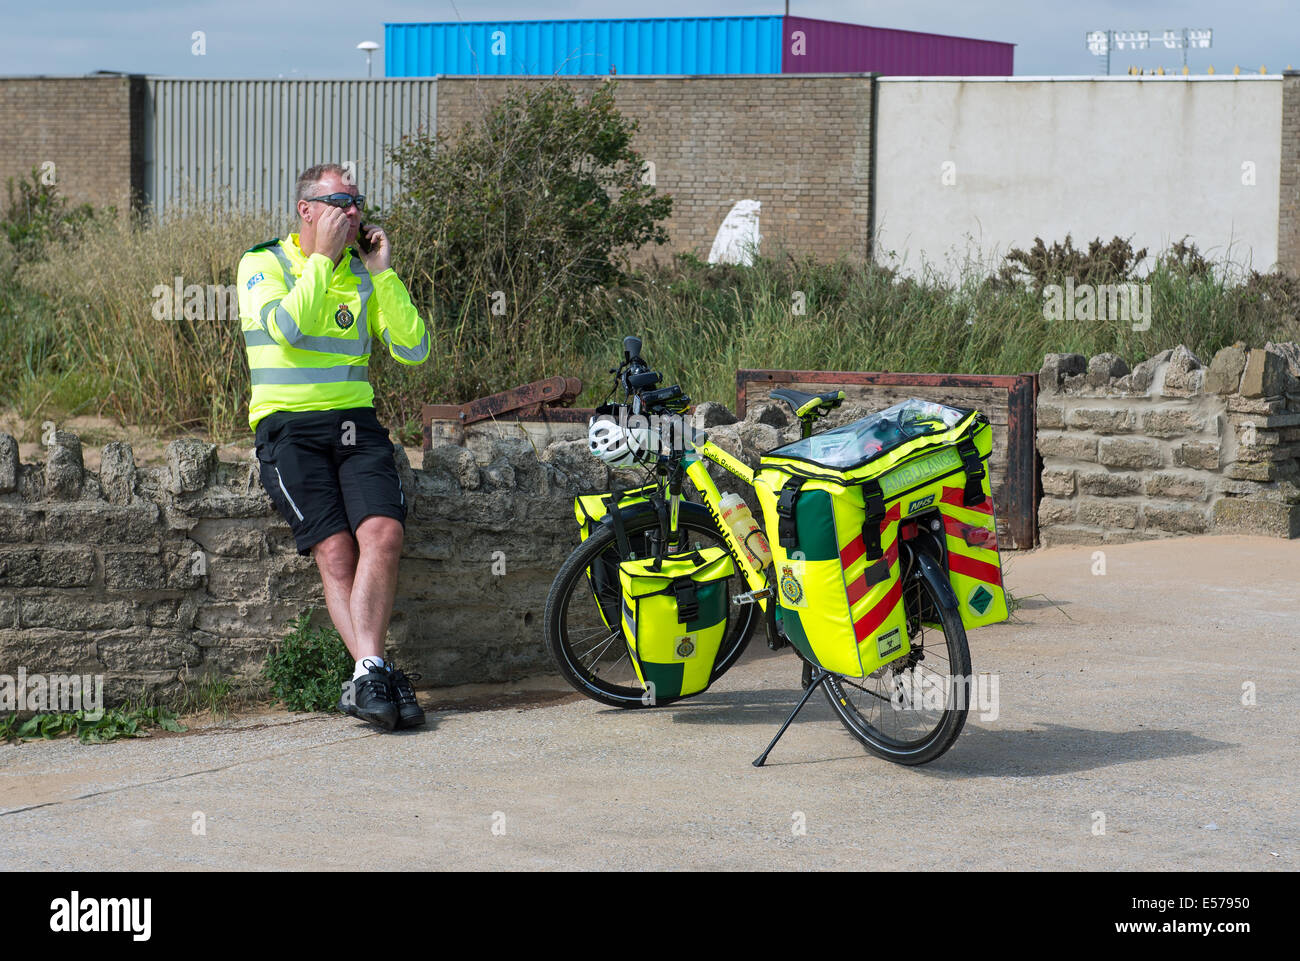 Skegness seafront bicycle ambulance with paramedic. Stock Photo